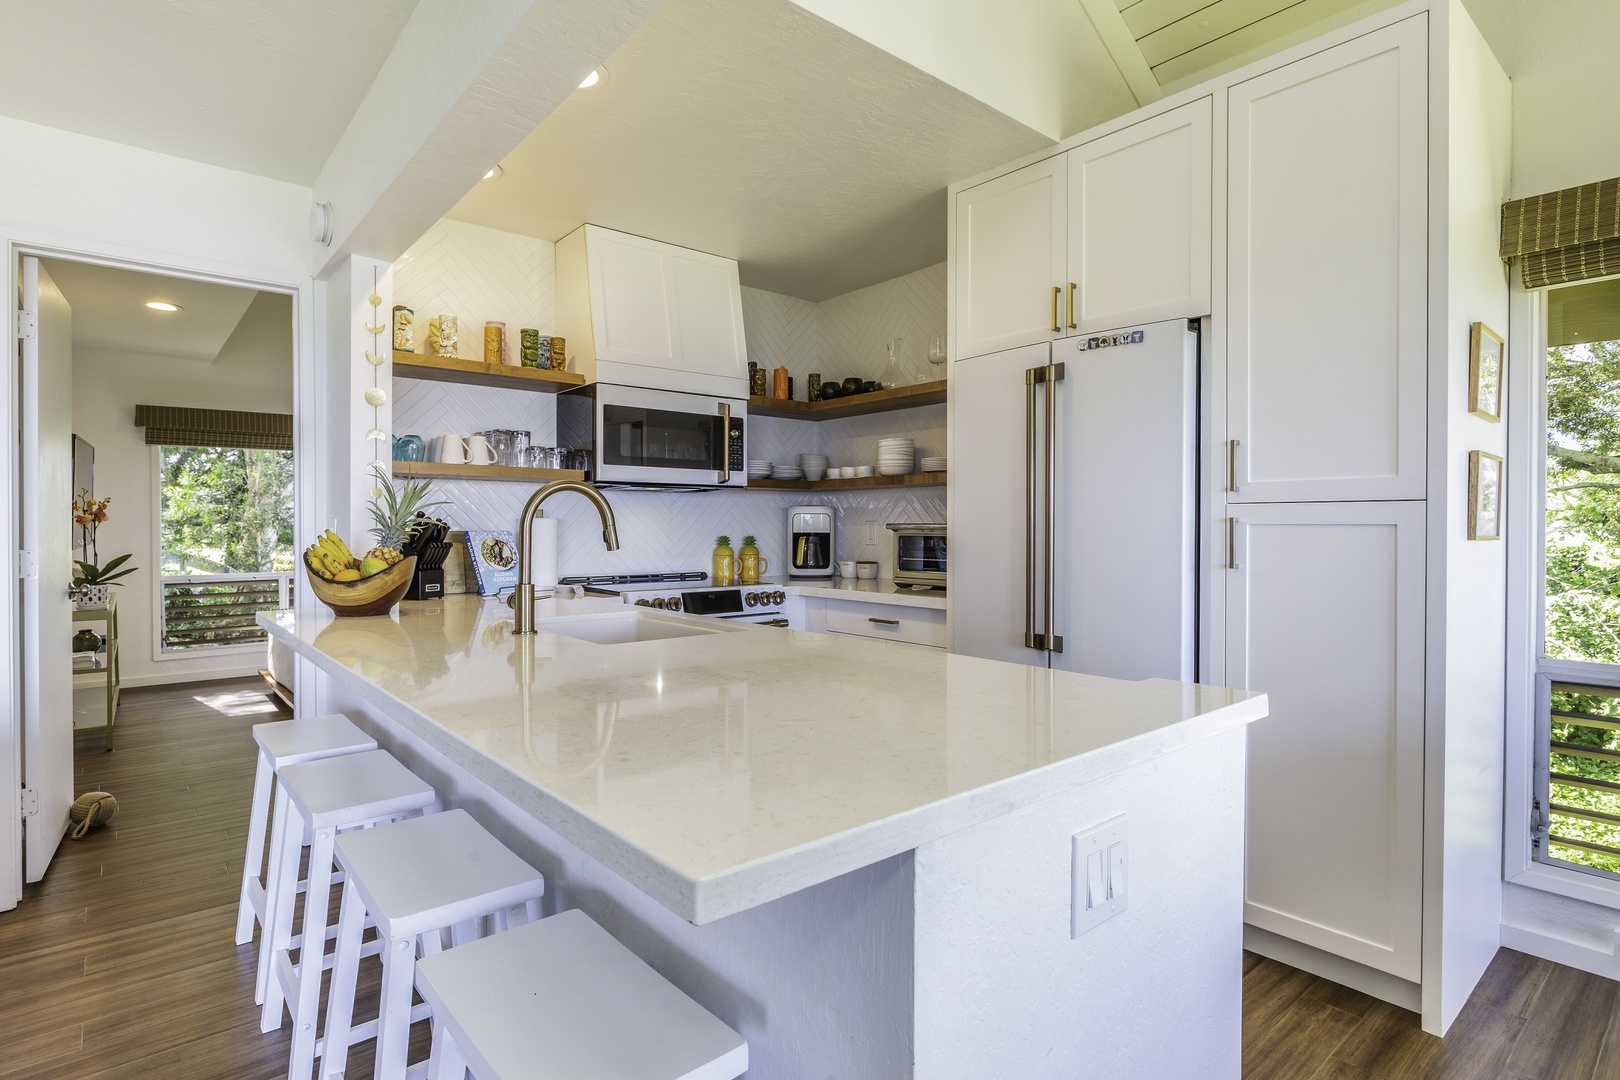 Princeville Vacation Rentals, Pali Ke Kua 207 - The galley-style kitchen is fully equipped for meal preparation, with newly installed spacious custom cabinets and appliances for all of your needs, including a dishwasher